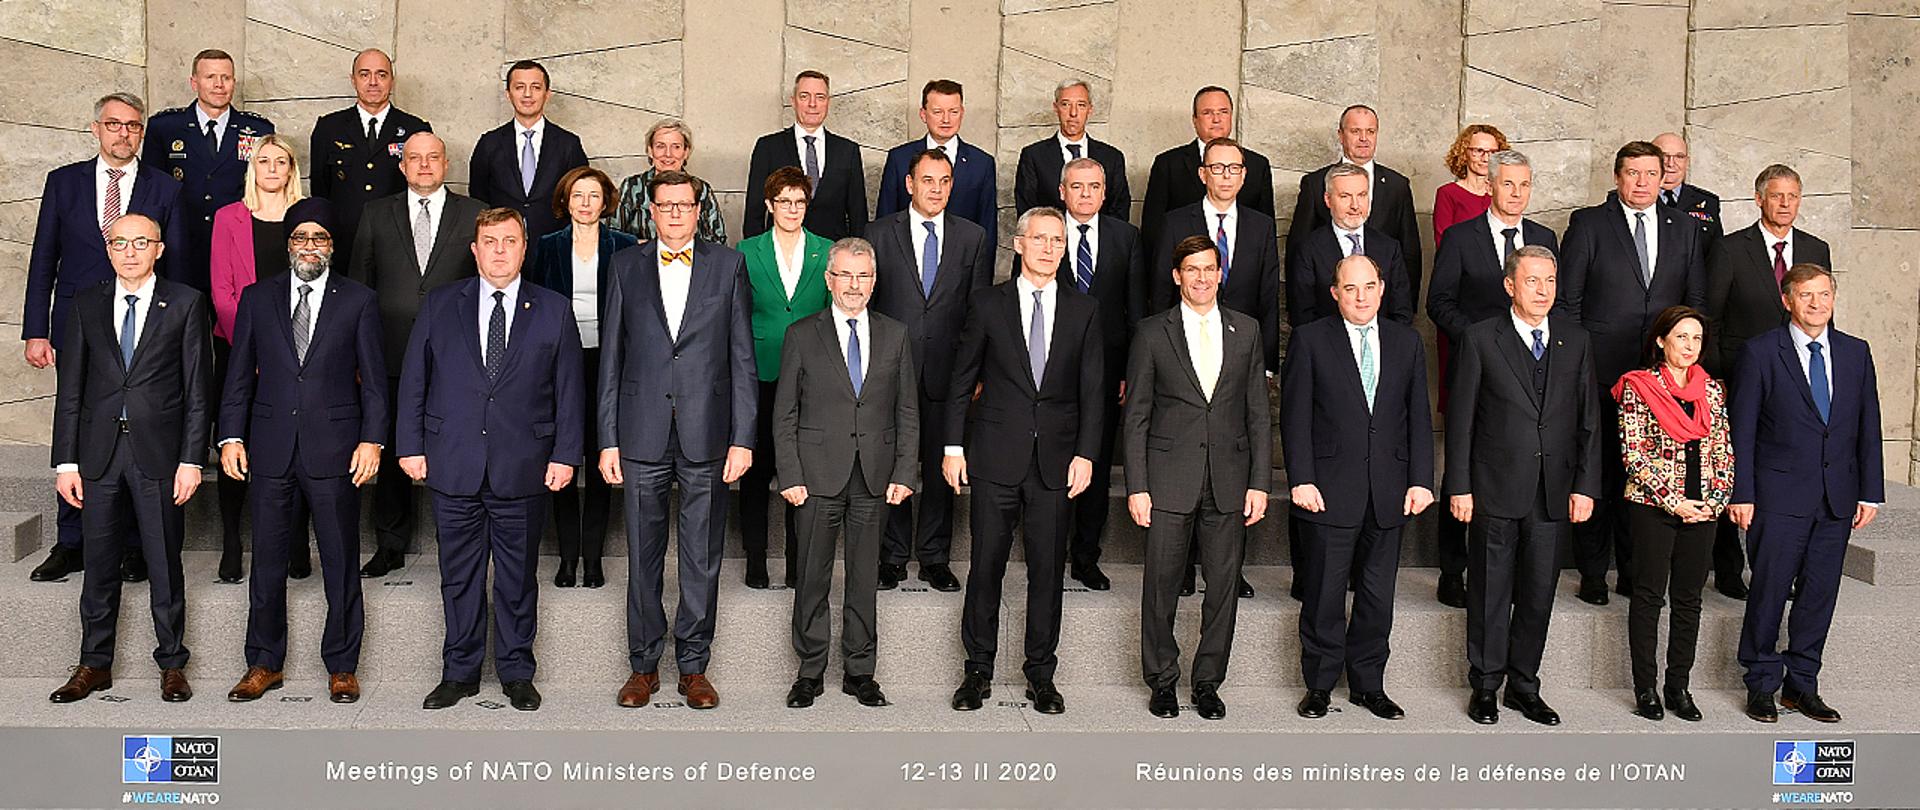 NATO defence ministers at the Alliance Headquarters.
February 12, this year the head of the Ministry of National Defence participated in the meeting of NATO defence ministers at the Alliance Headquarters in Brussels. The session of the North Atlantic Council (NAC) was devoted to, among others security situation in the Middle East.
